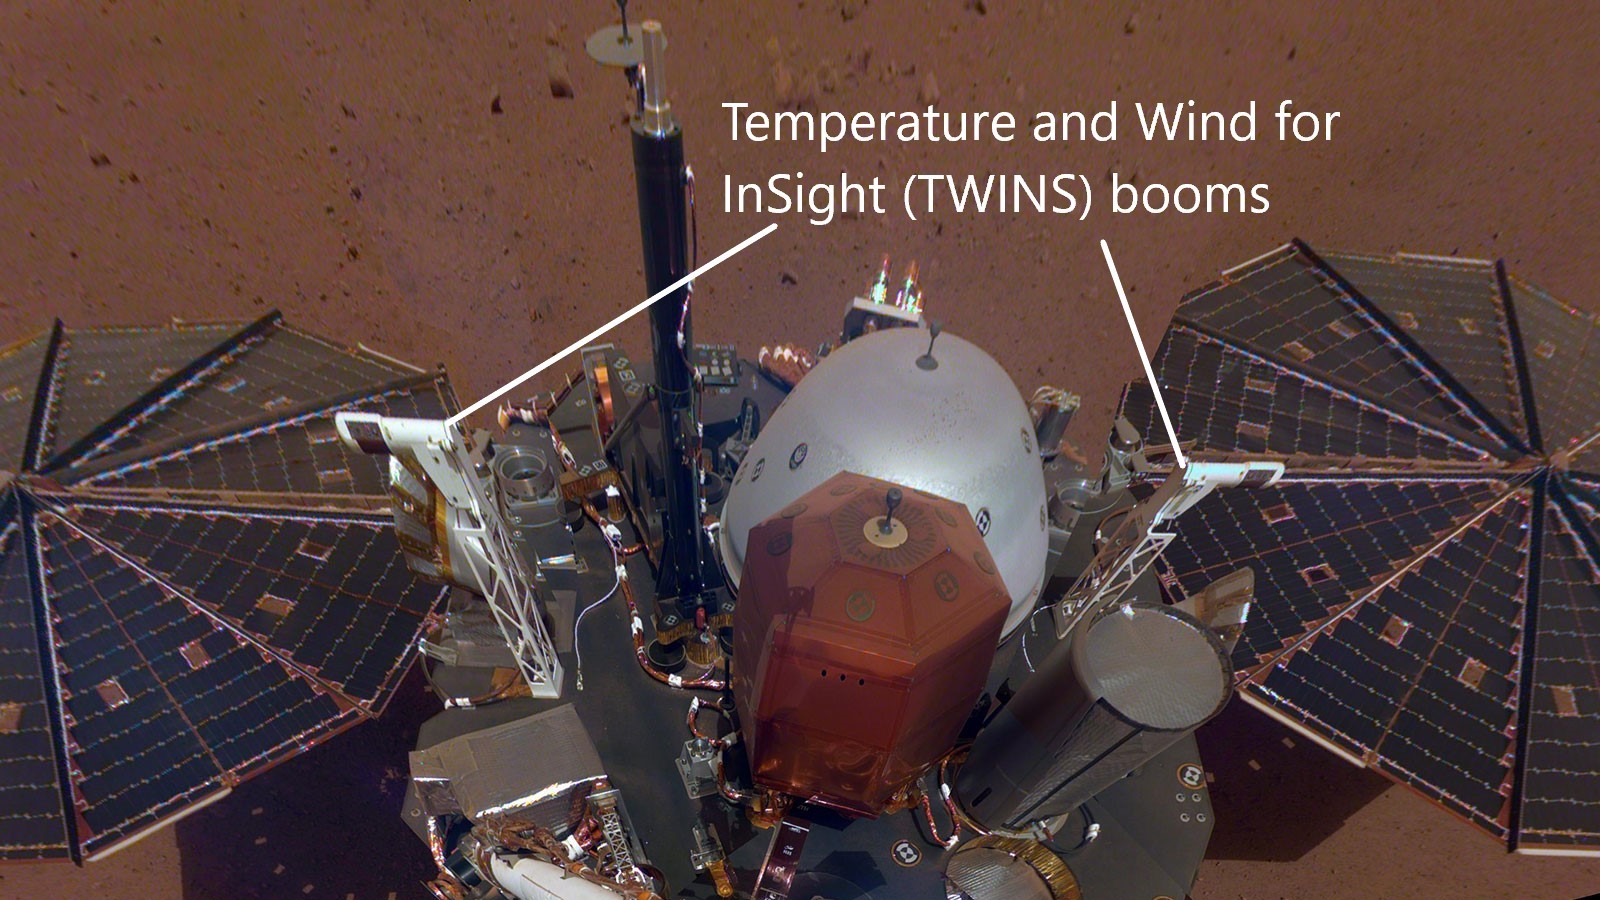 The white east- and west-facing booms — called Temperature and Wind for InSight, or TWINS — on the deck of NASA's InSight lander belong to its suite of weather sensors.